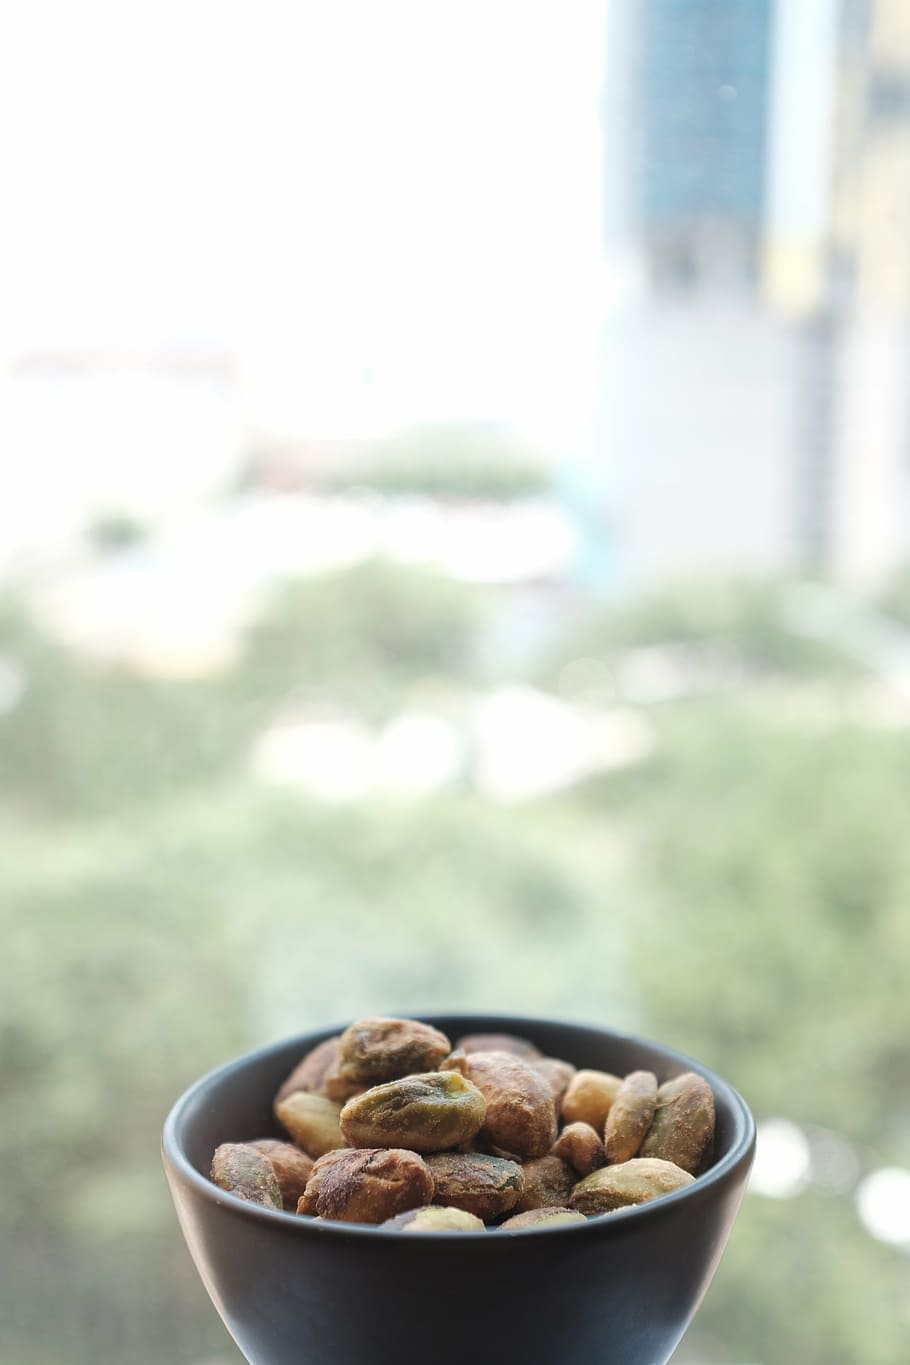 pistachios, nuts, salted, snack, bowl, food, healthy, brown, vegetarian, nutrition